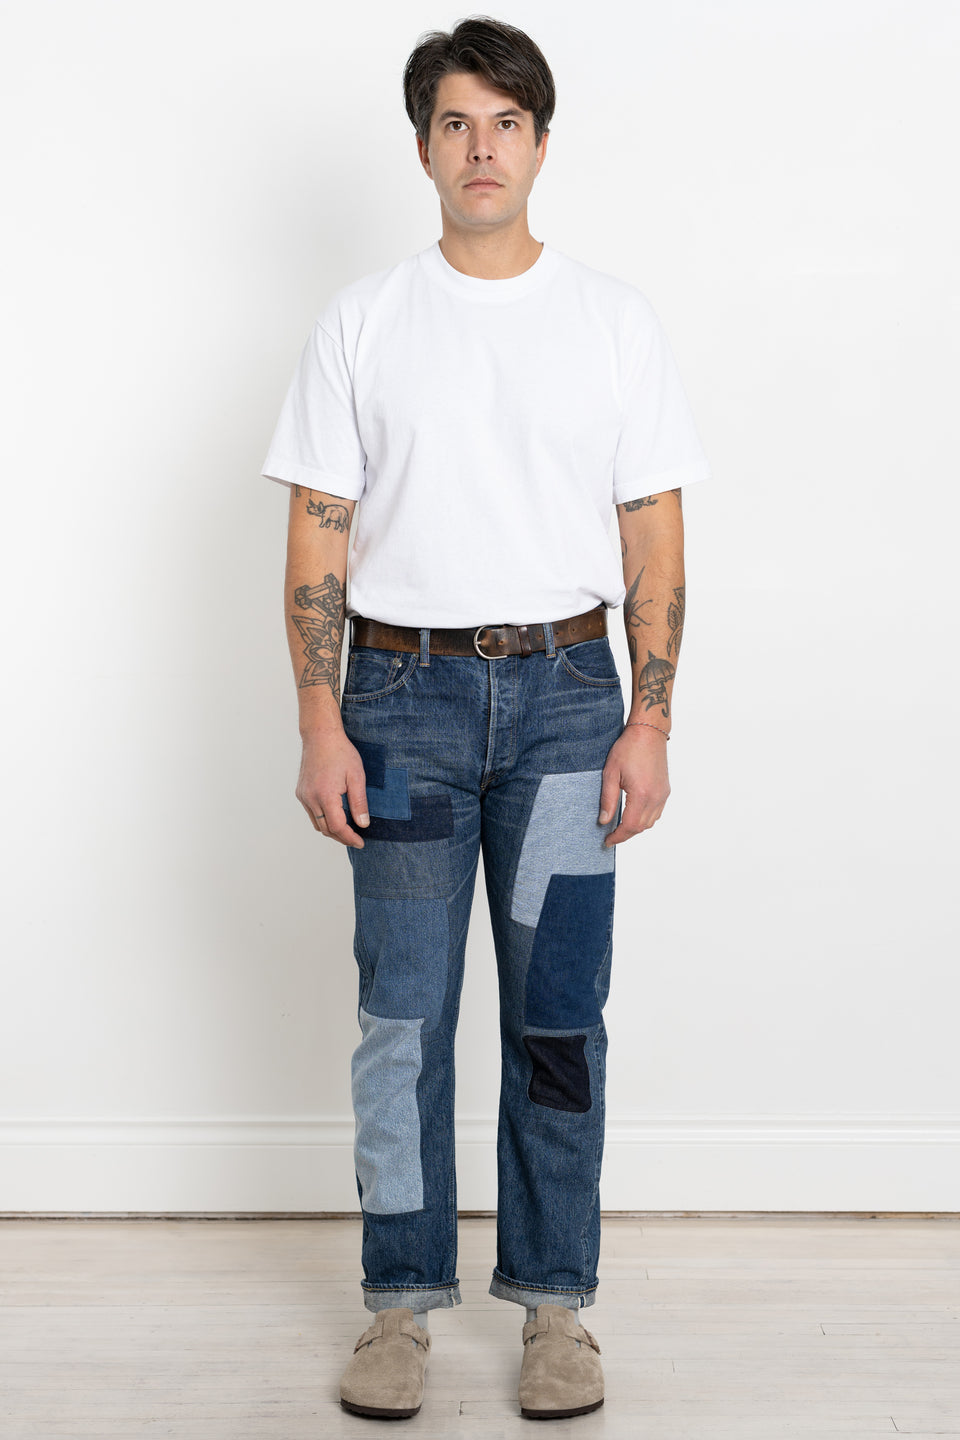 orSlow Japan 23AW FW23 Men's Collection 105 Patch Work Remake Jeans Calculus Victoria BC Canada